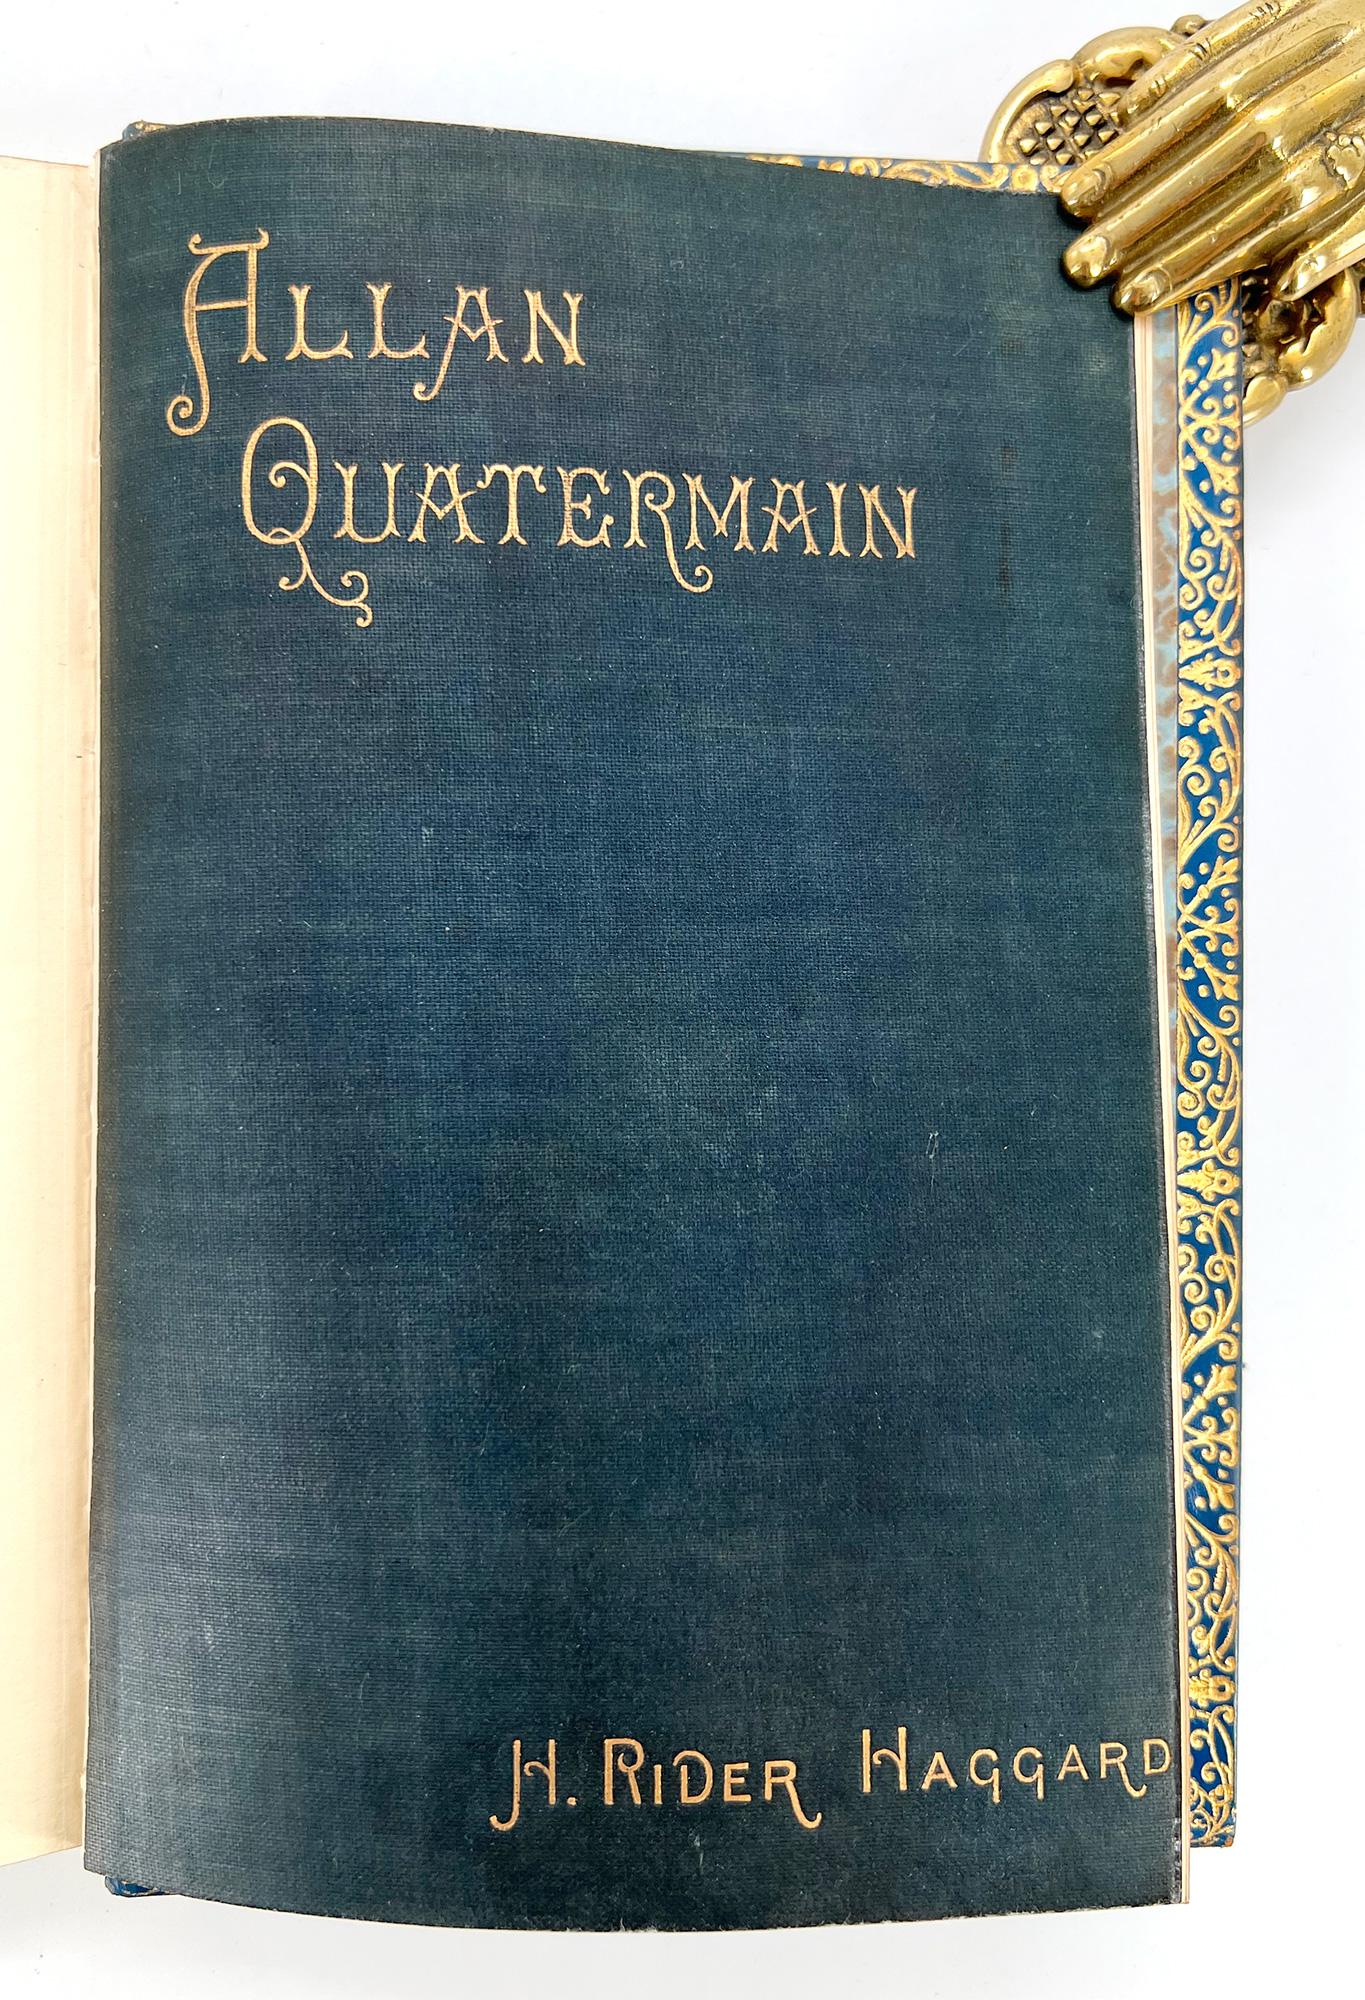 Allan Quatermain by H. Rider HAGGARD in a Handsome binding For Sale 6